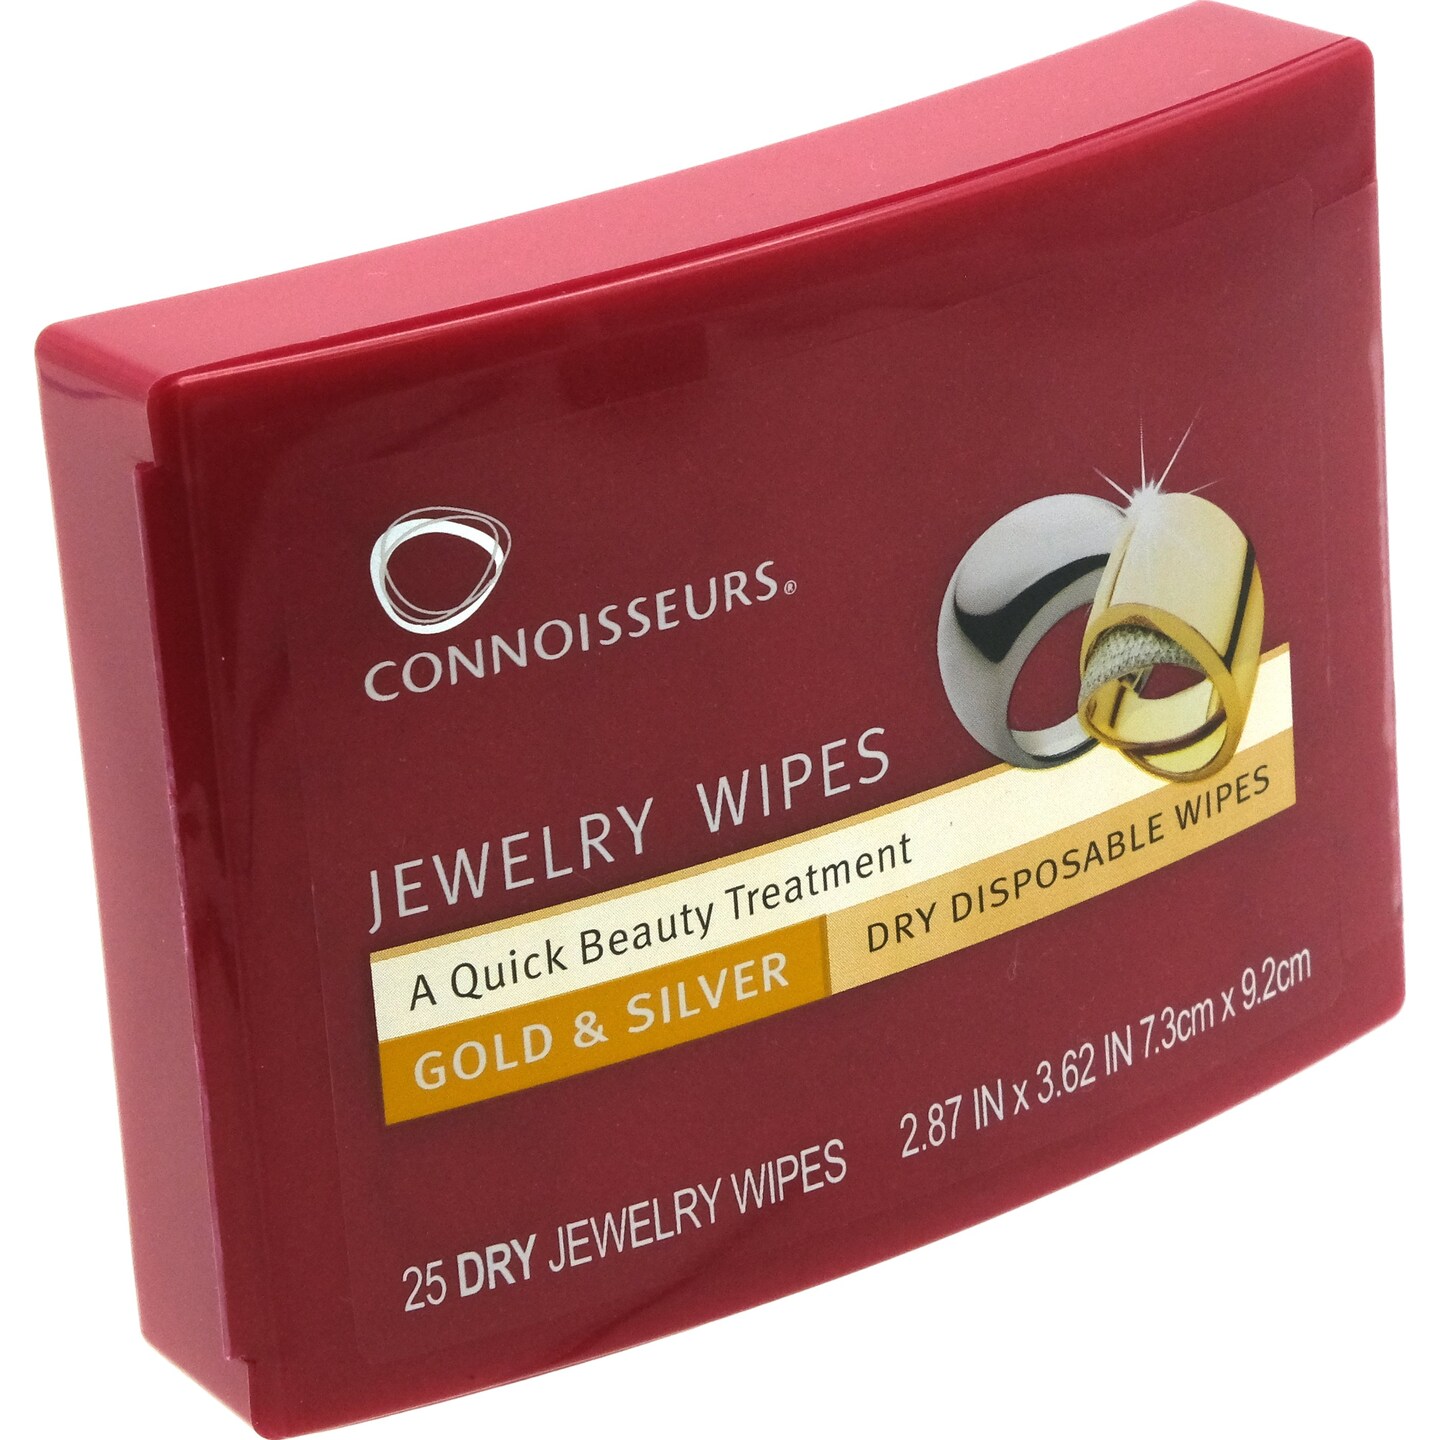 Connoisseurs Jewelers Jewelry Cleaning Cleaner Wipes Two